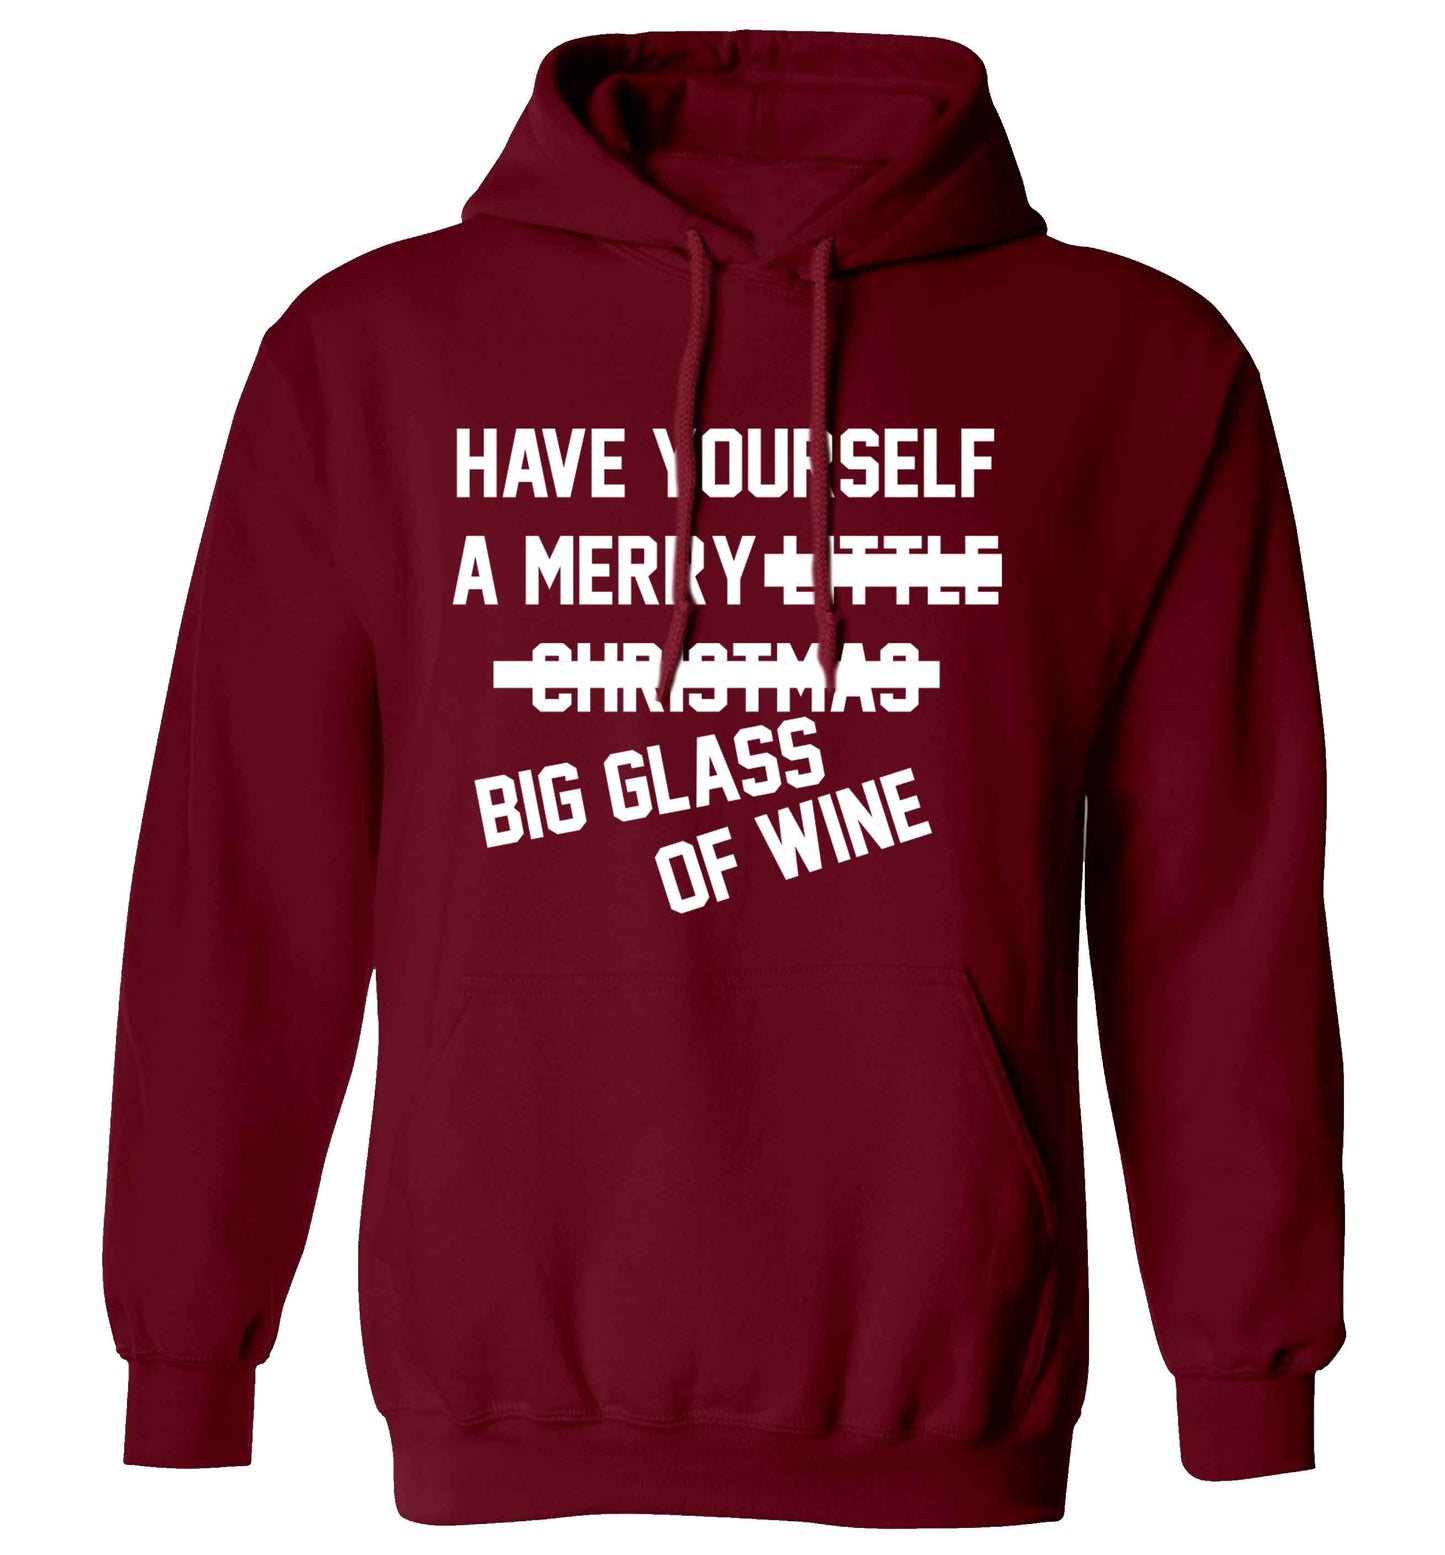 Have yourself a merry big glass of wine adults unisex maroon hoodie 2XL